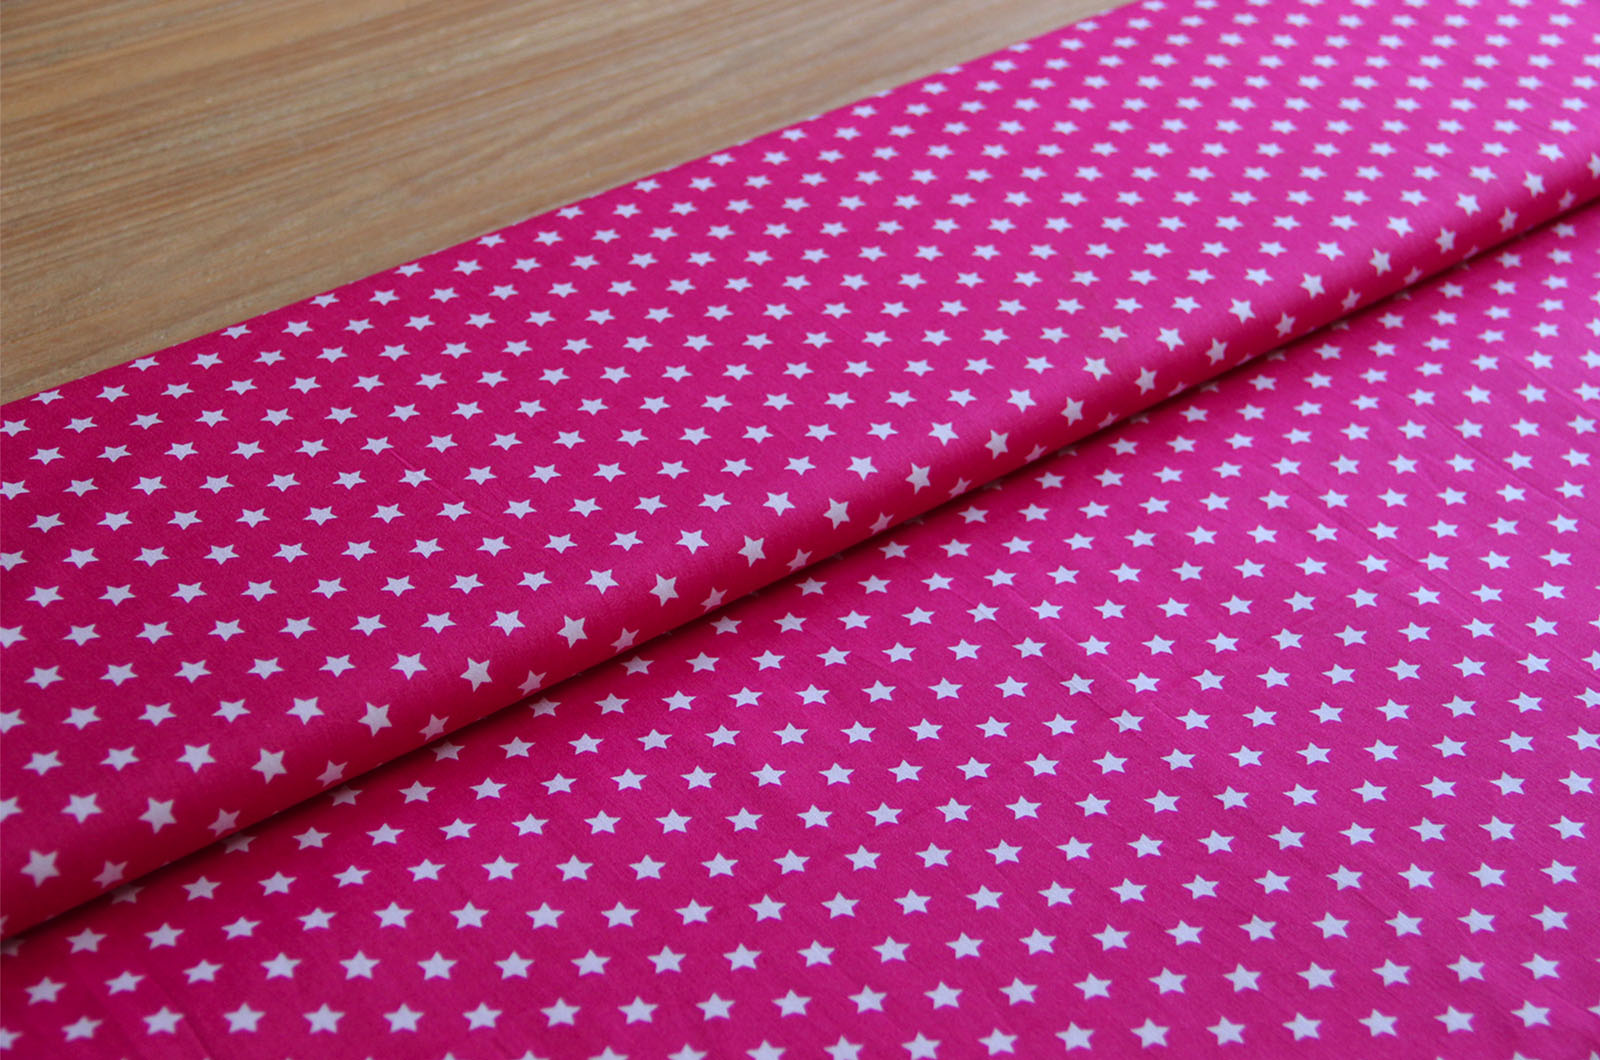 Buy 017-pink Cotton print stars 1cm * From 50cm